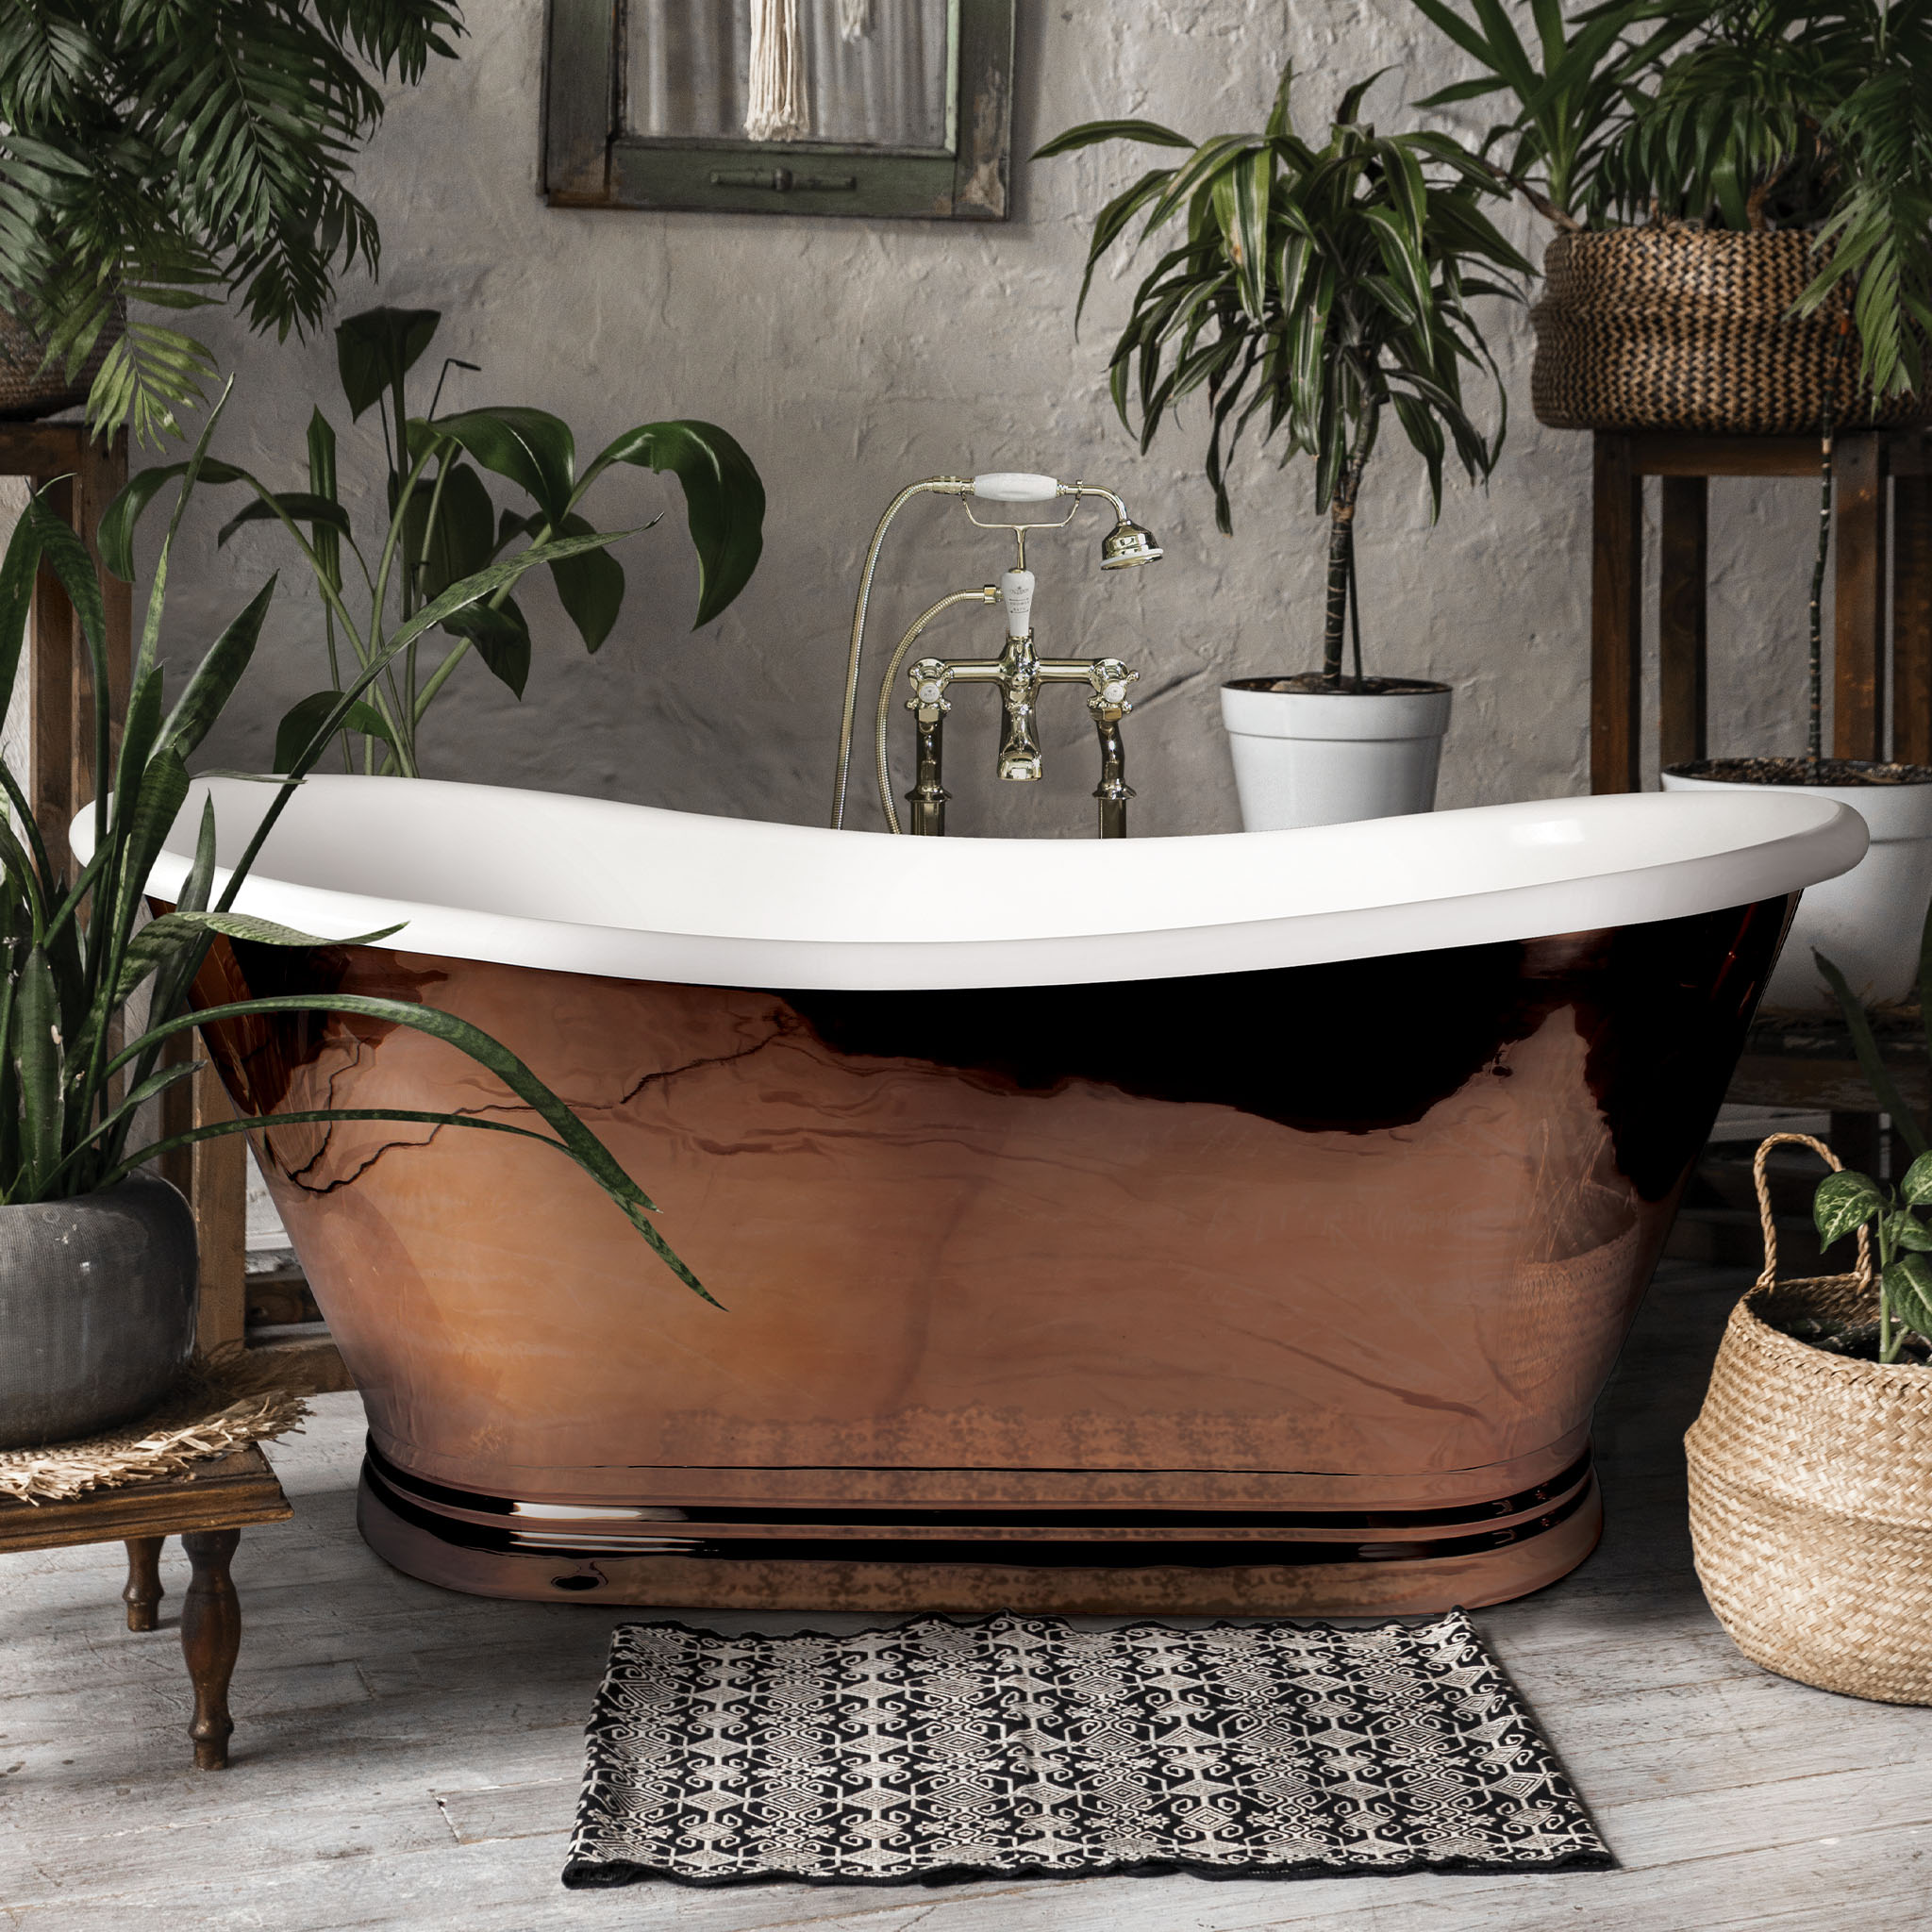 BC Designs Copper Enamel Double Ended Roll Top Bath